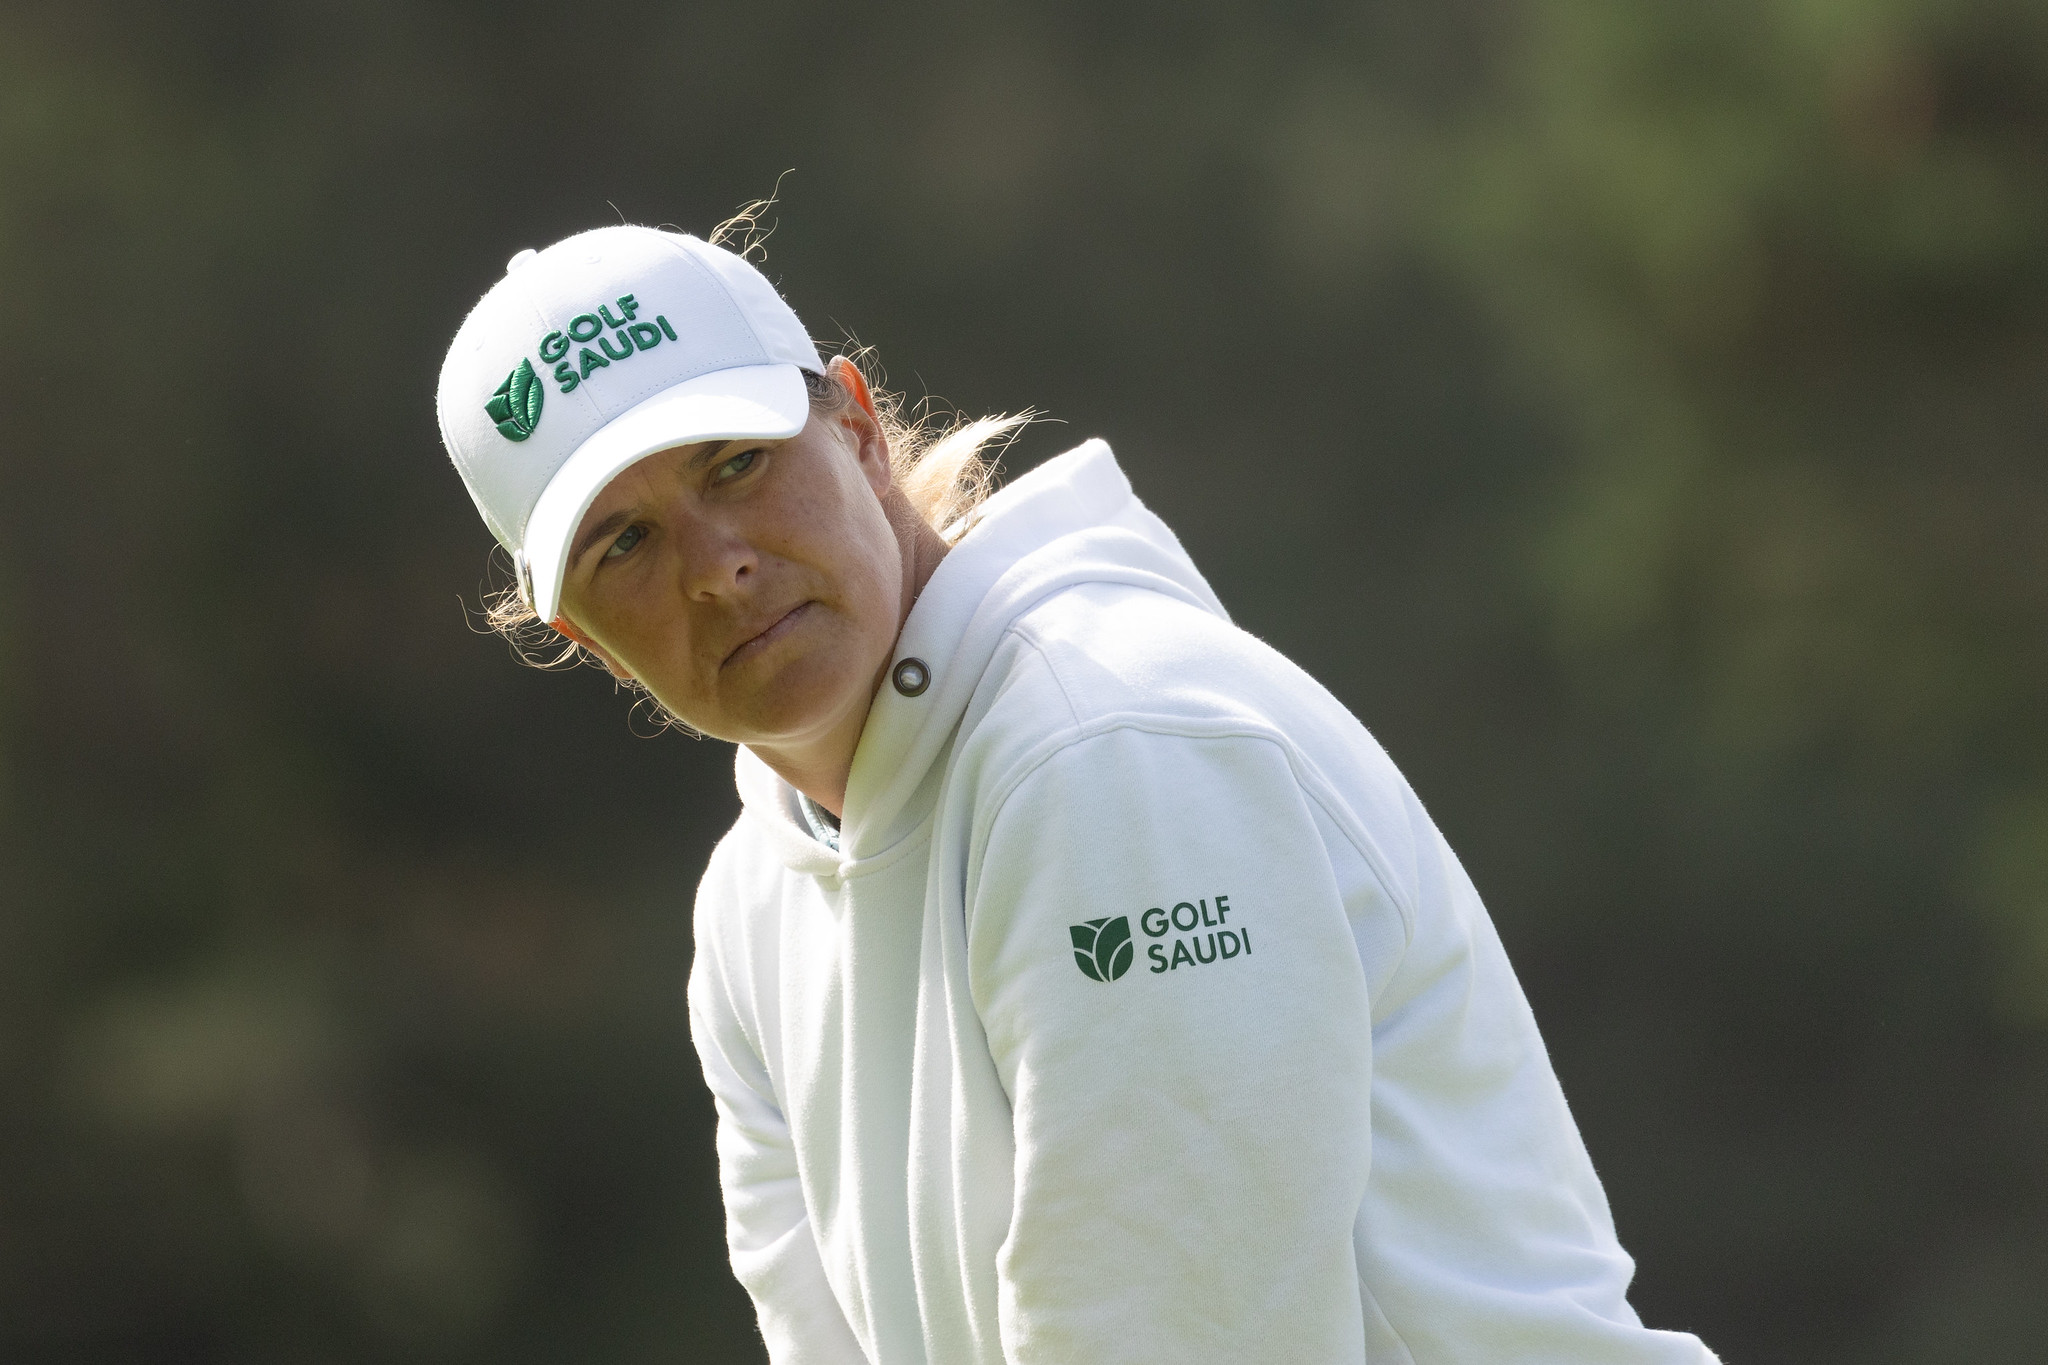 skarpnord in contention after special week at the solheim cup